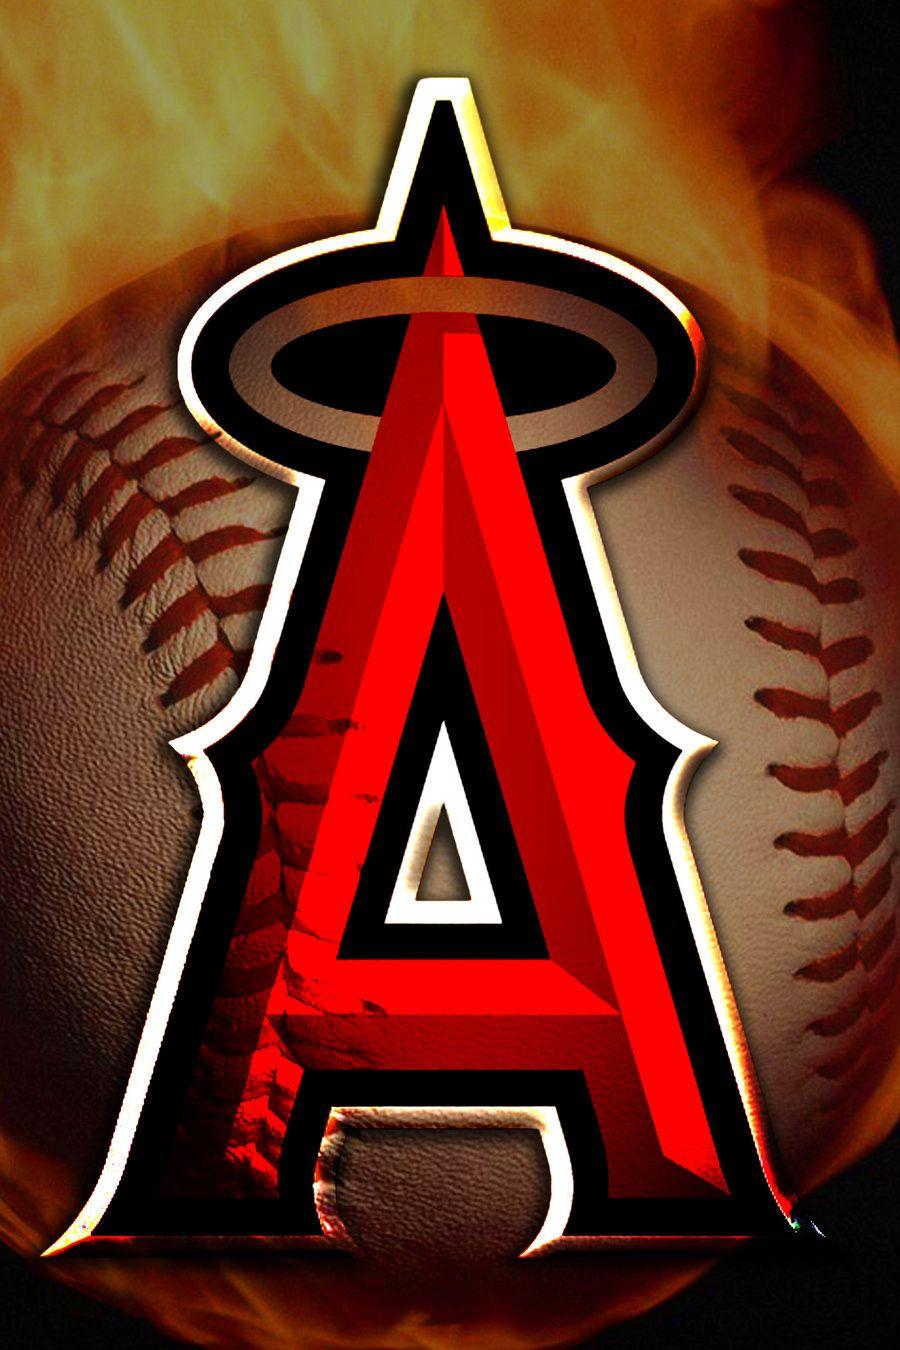 Los Angeles Angels on X: Your new wallpaper is on deck. Download it at    / X